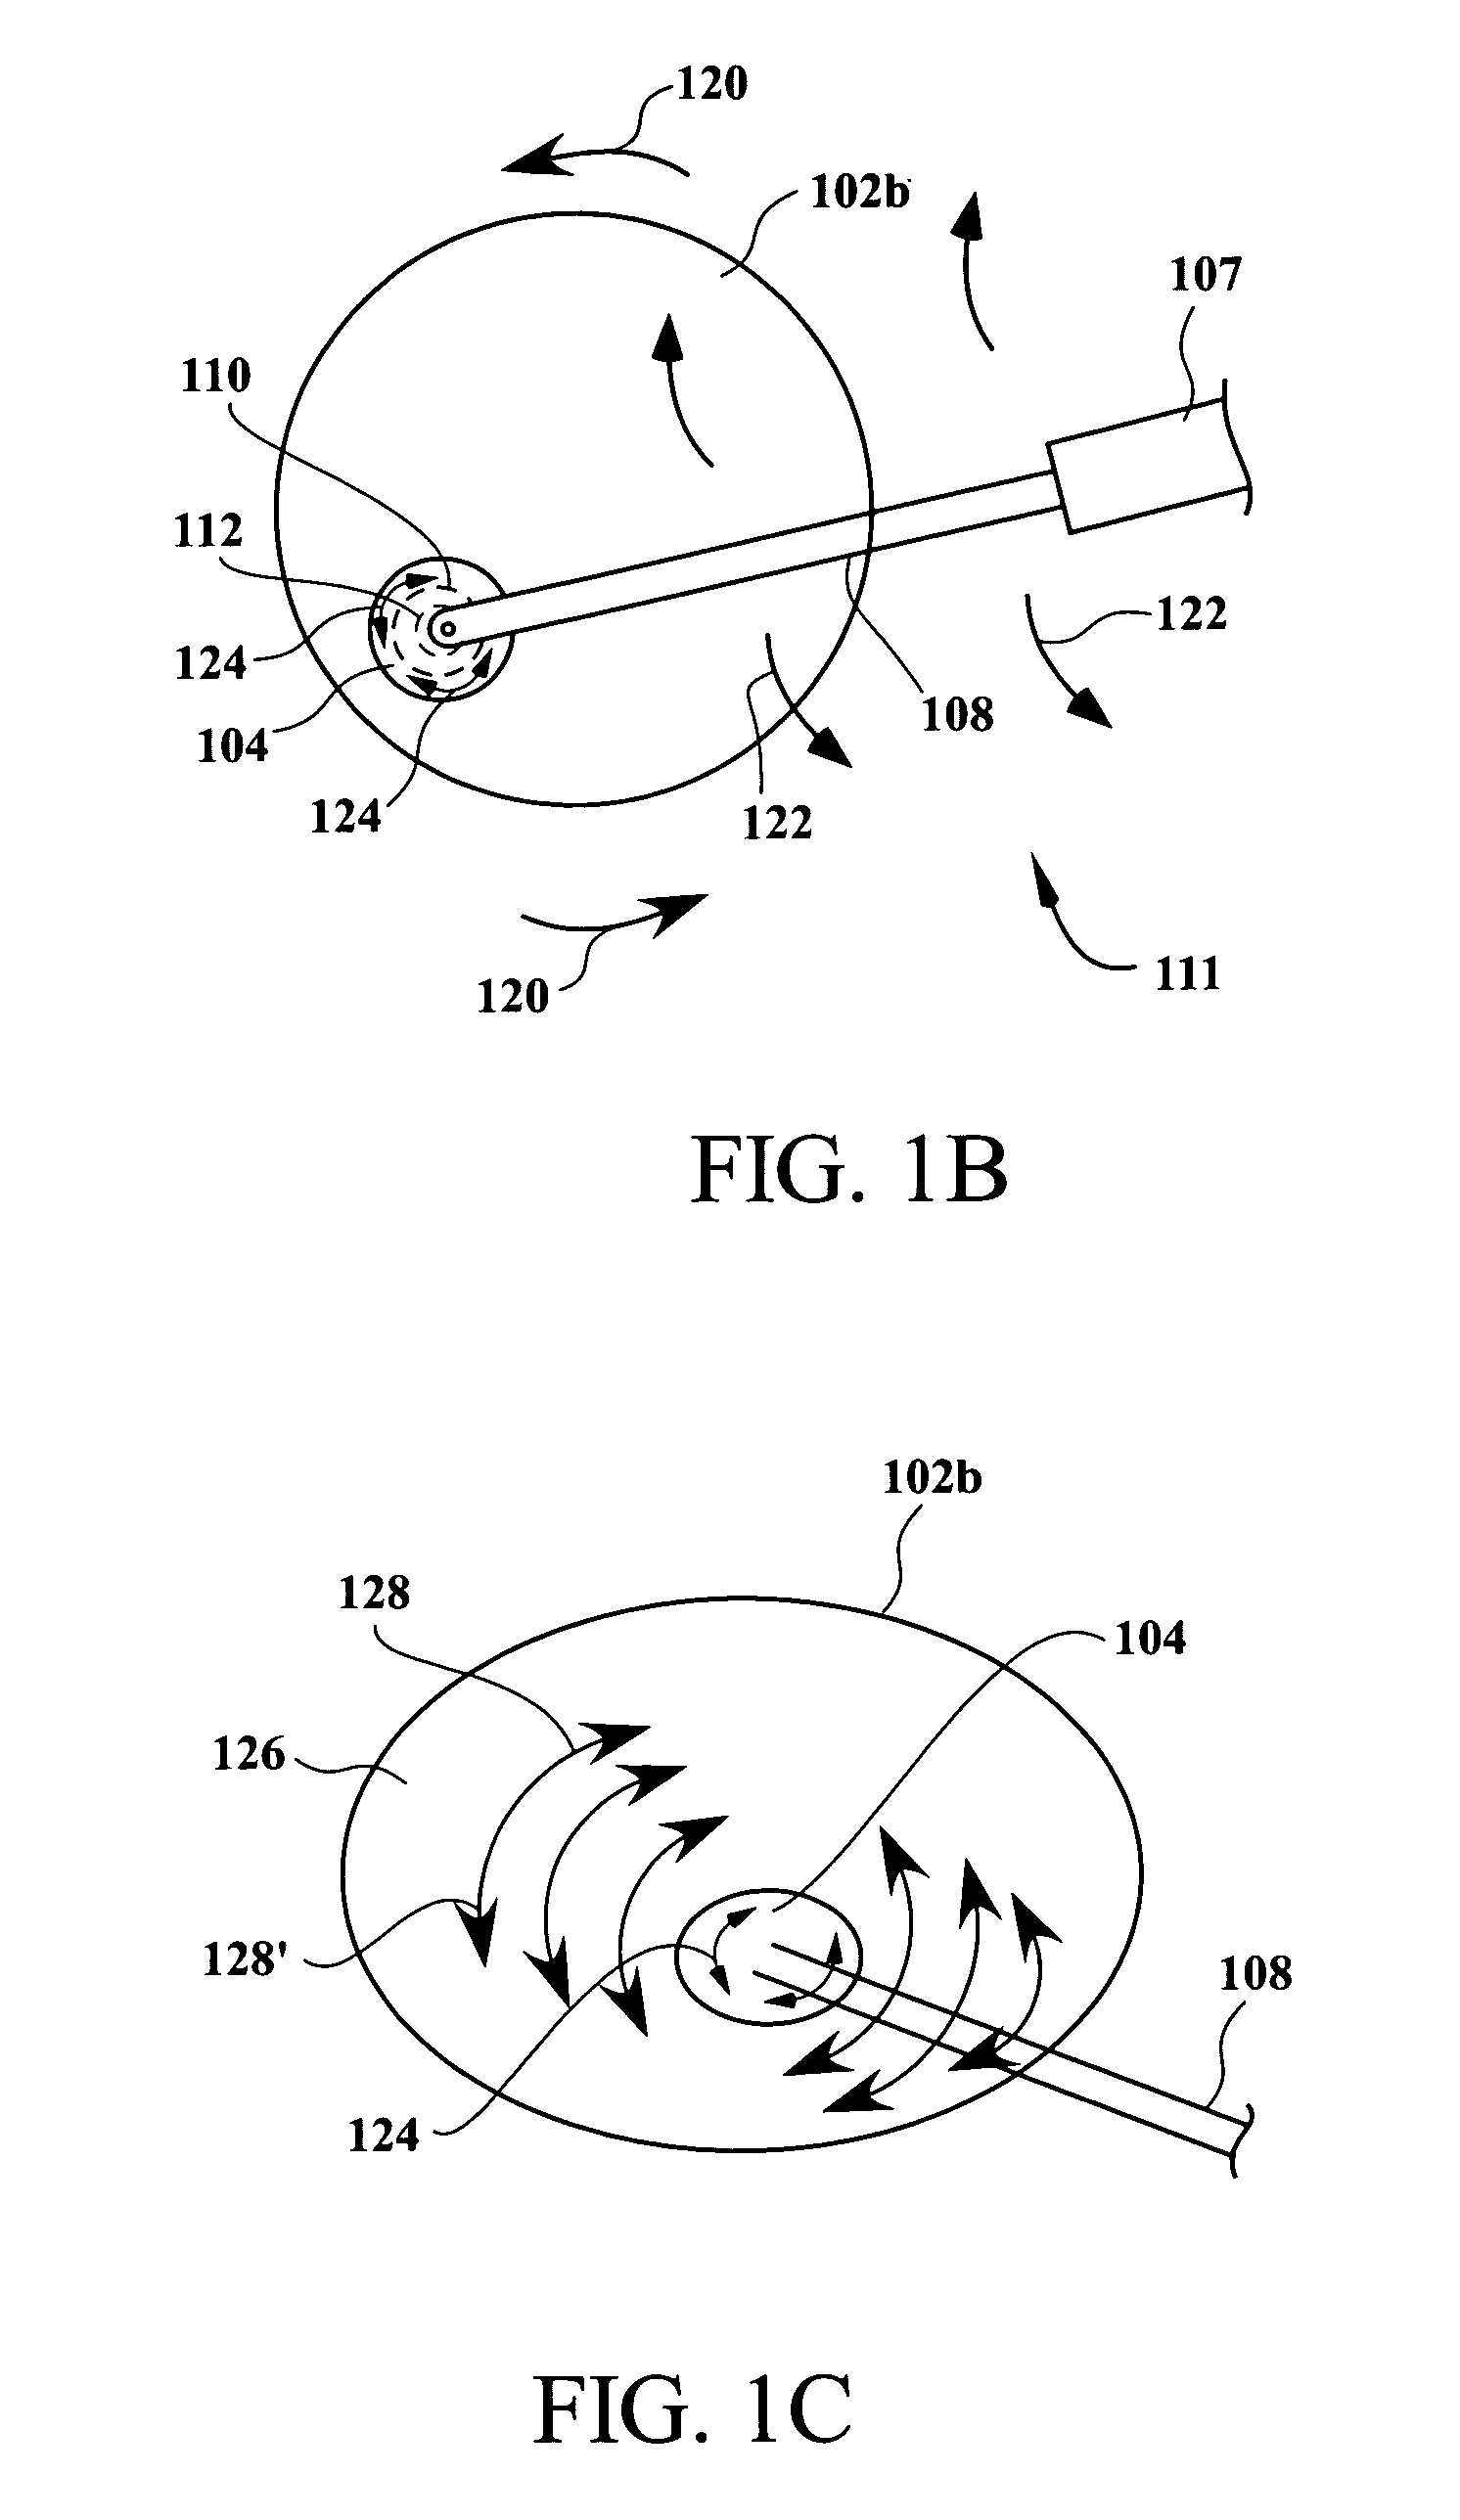 Apparatus for oscillating a head and methods for implementing the same